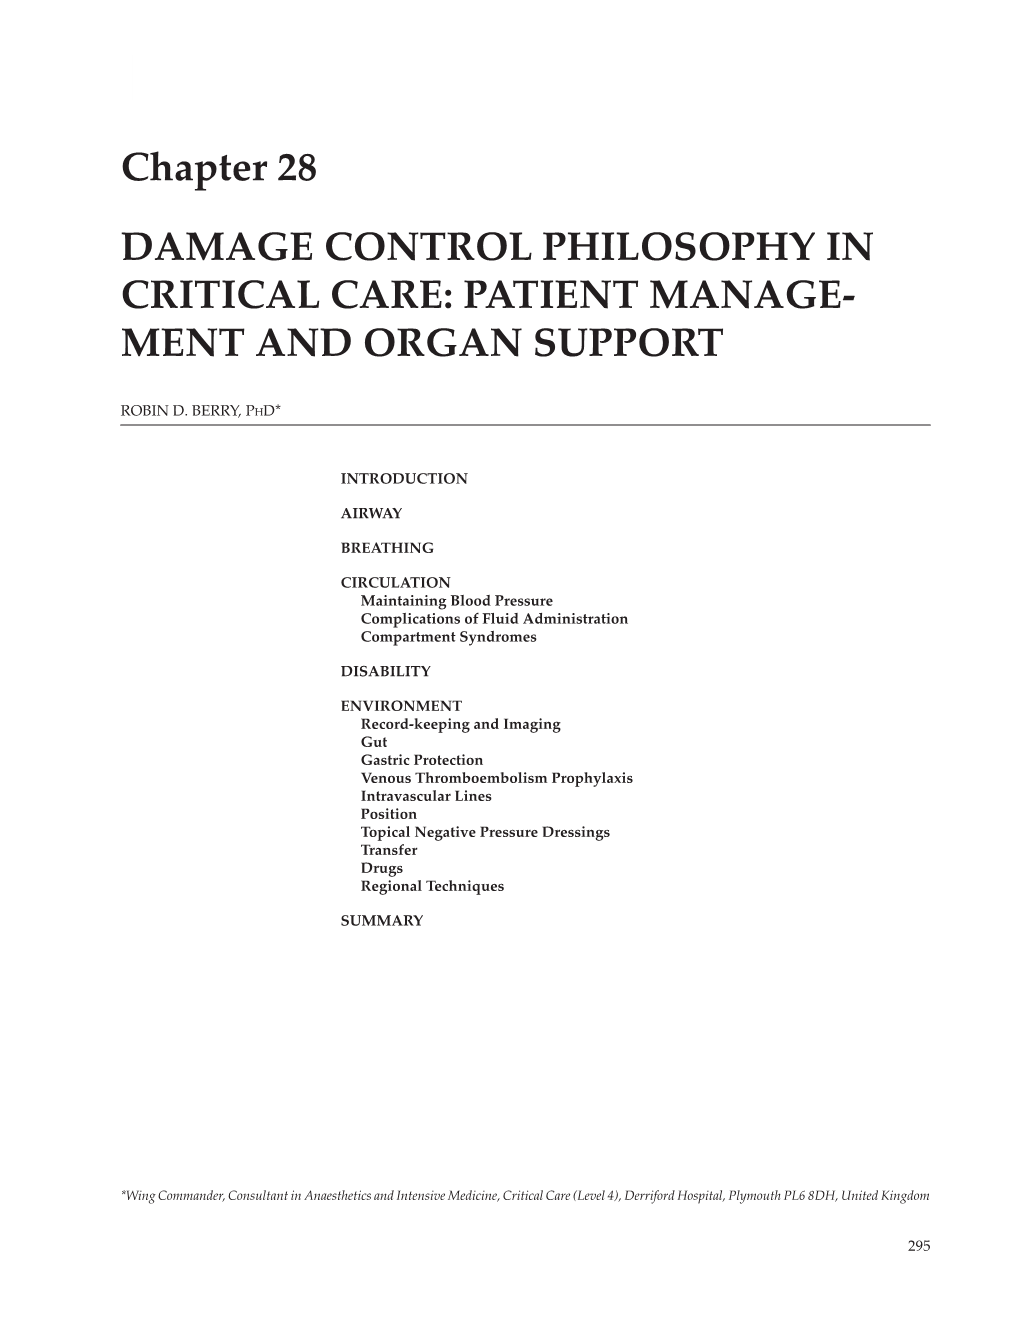 Chapter 28 Damage Control Philosophy in Critical Care: Patient Manage- Ment and Organ Support